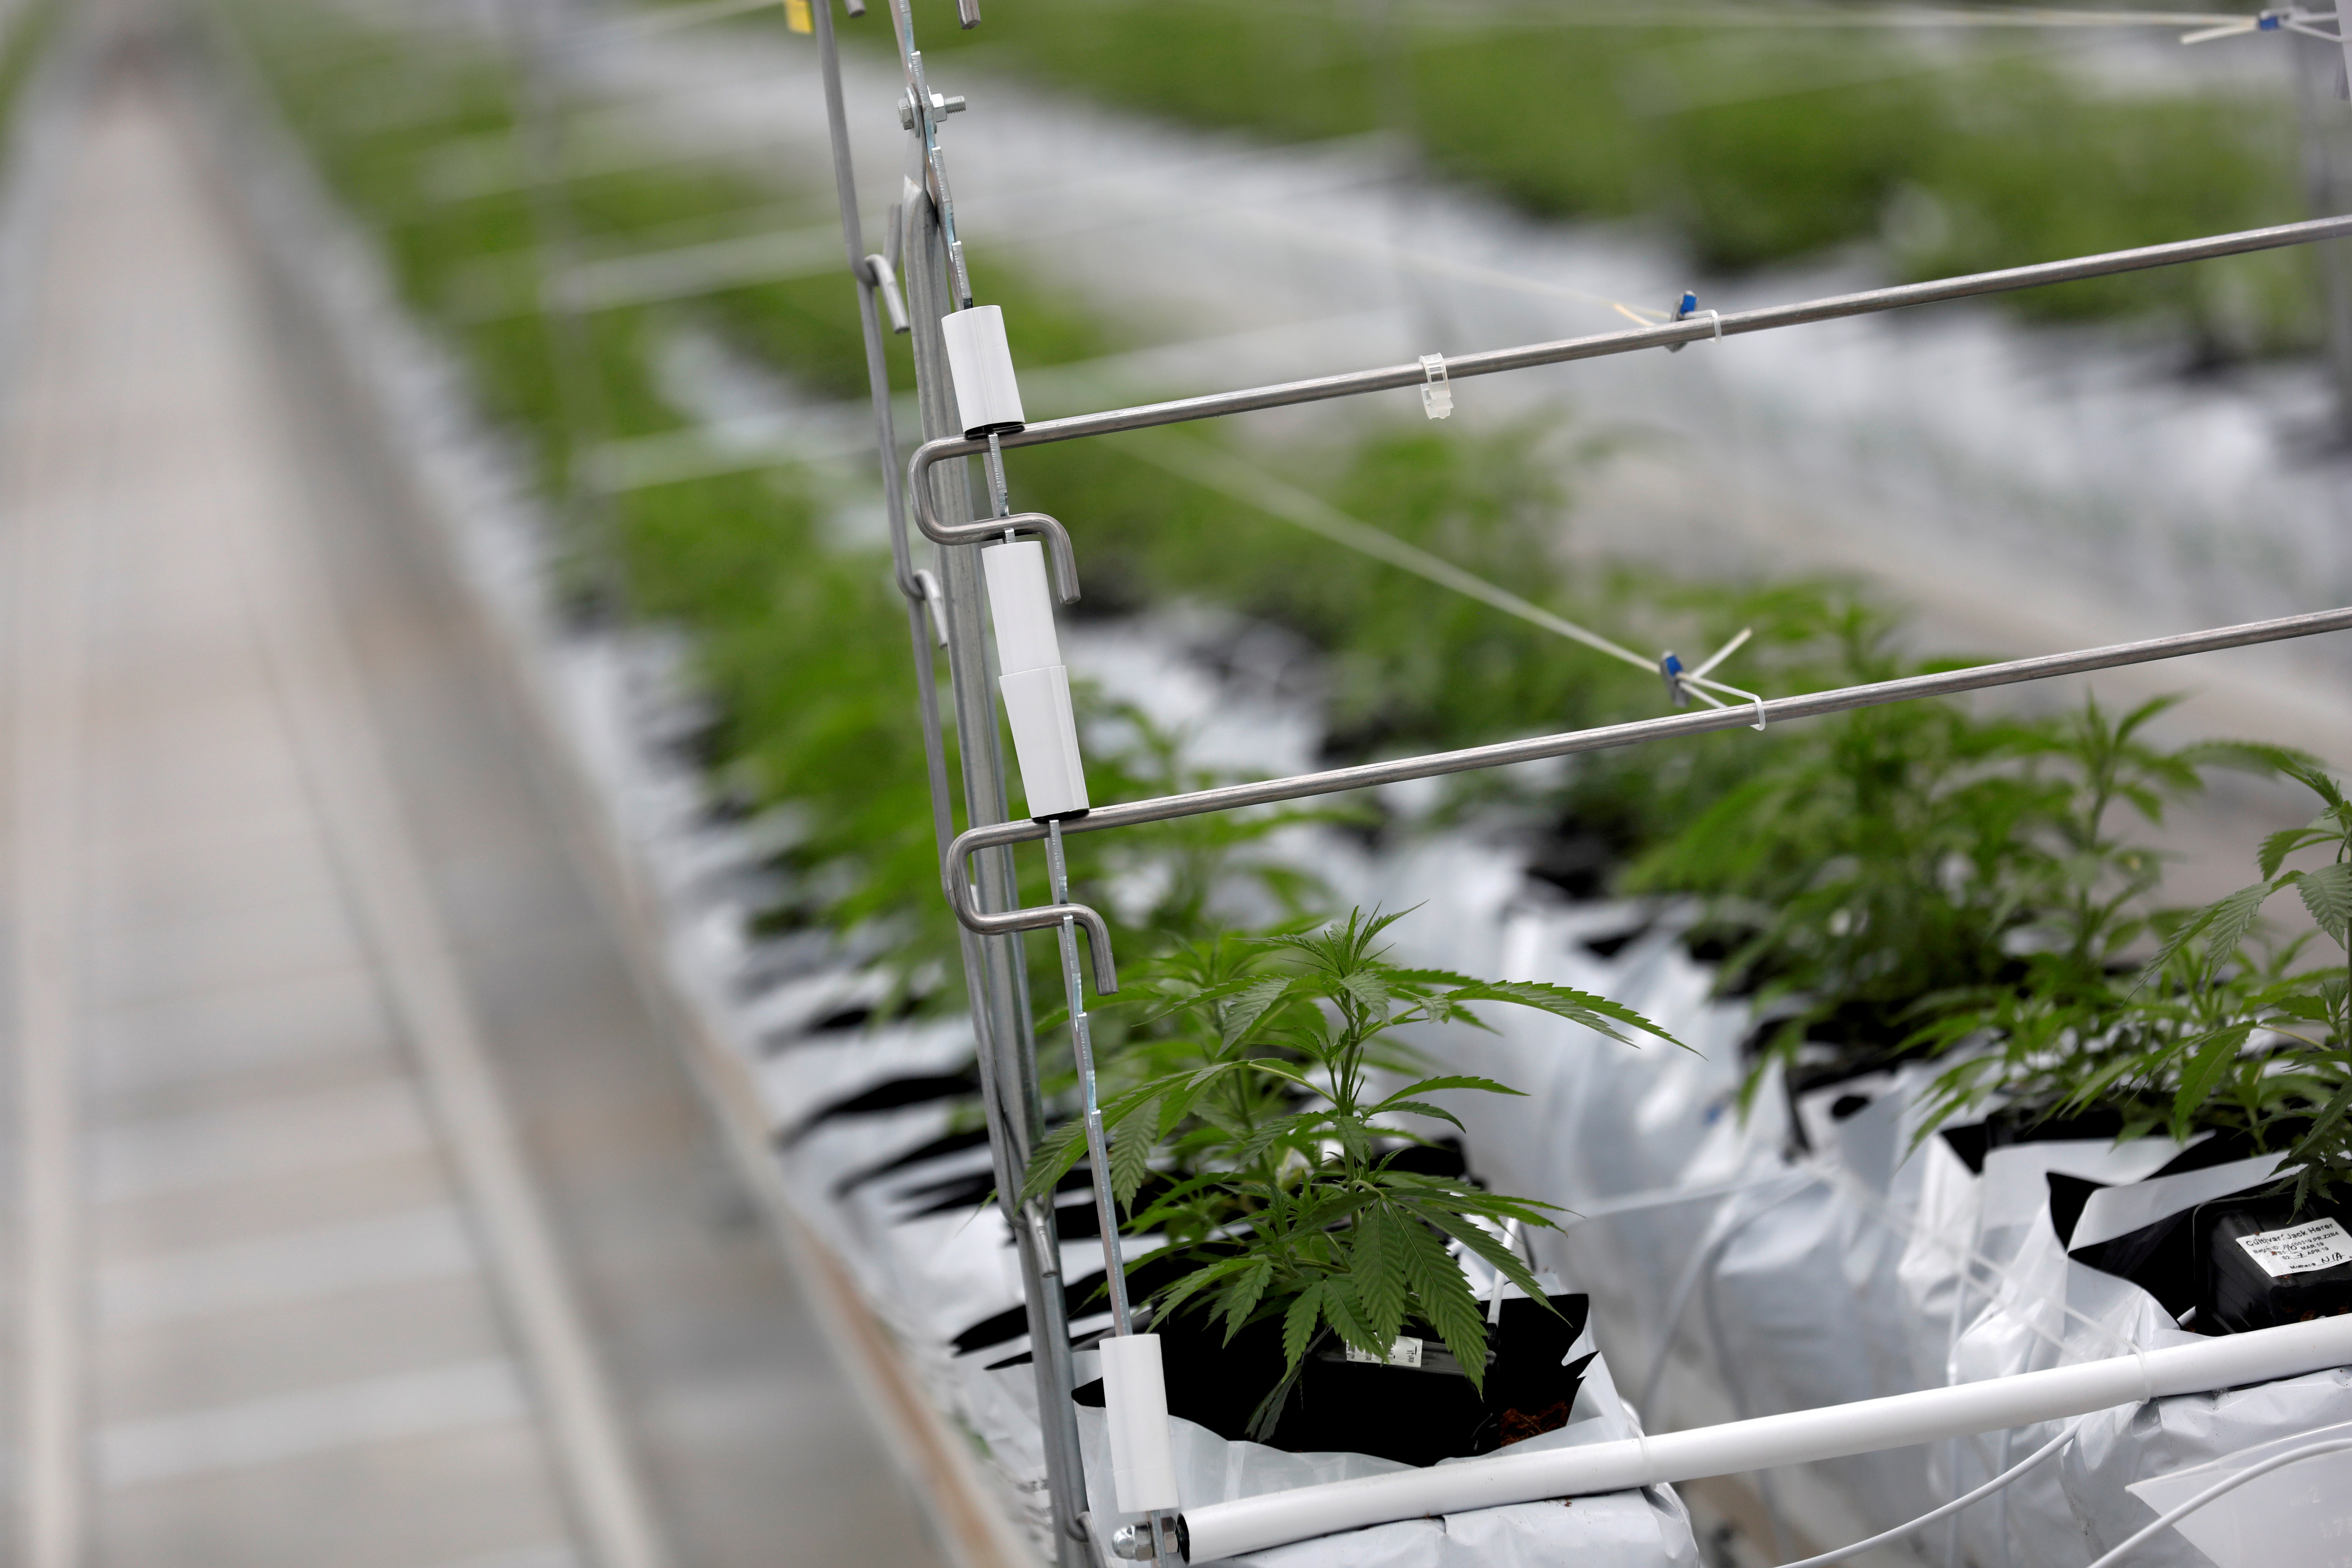 Cannabis plants grow inside the Tilray factory in Cantanhede